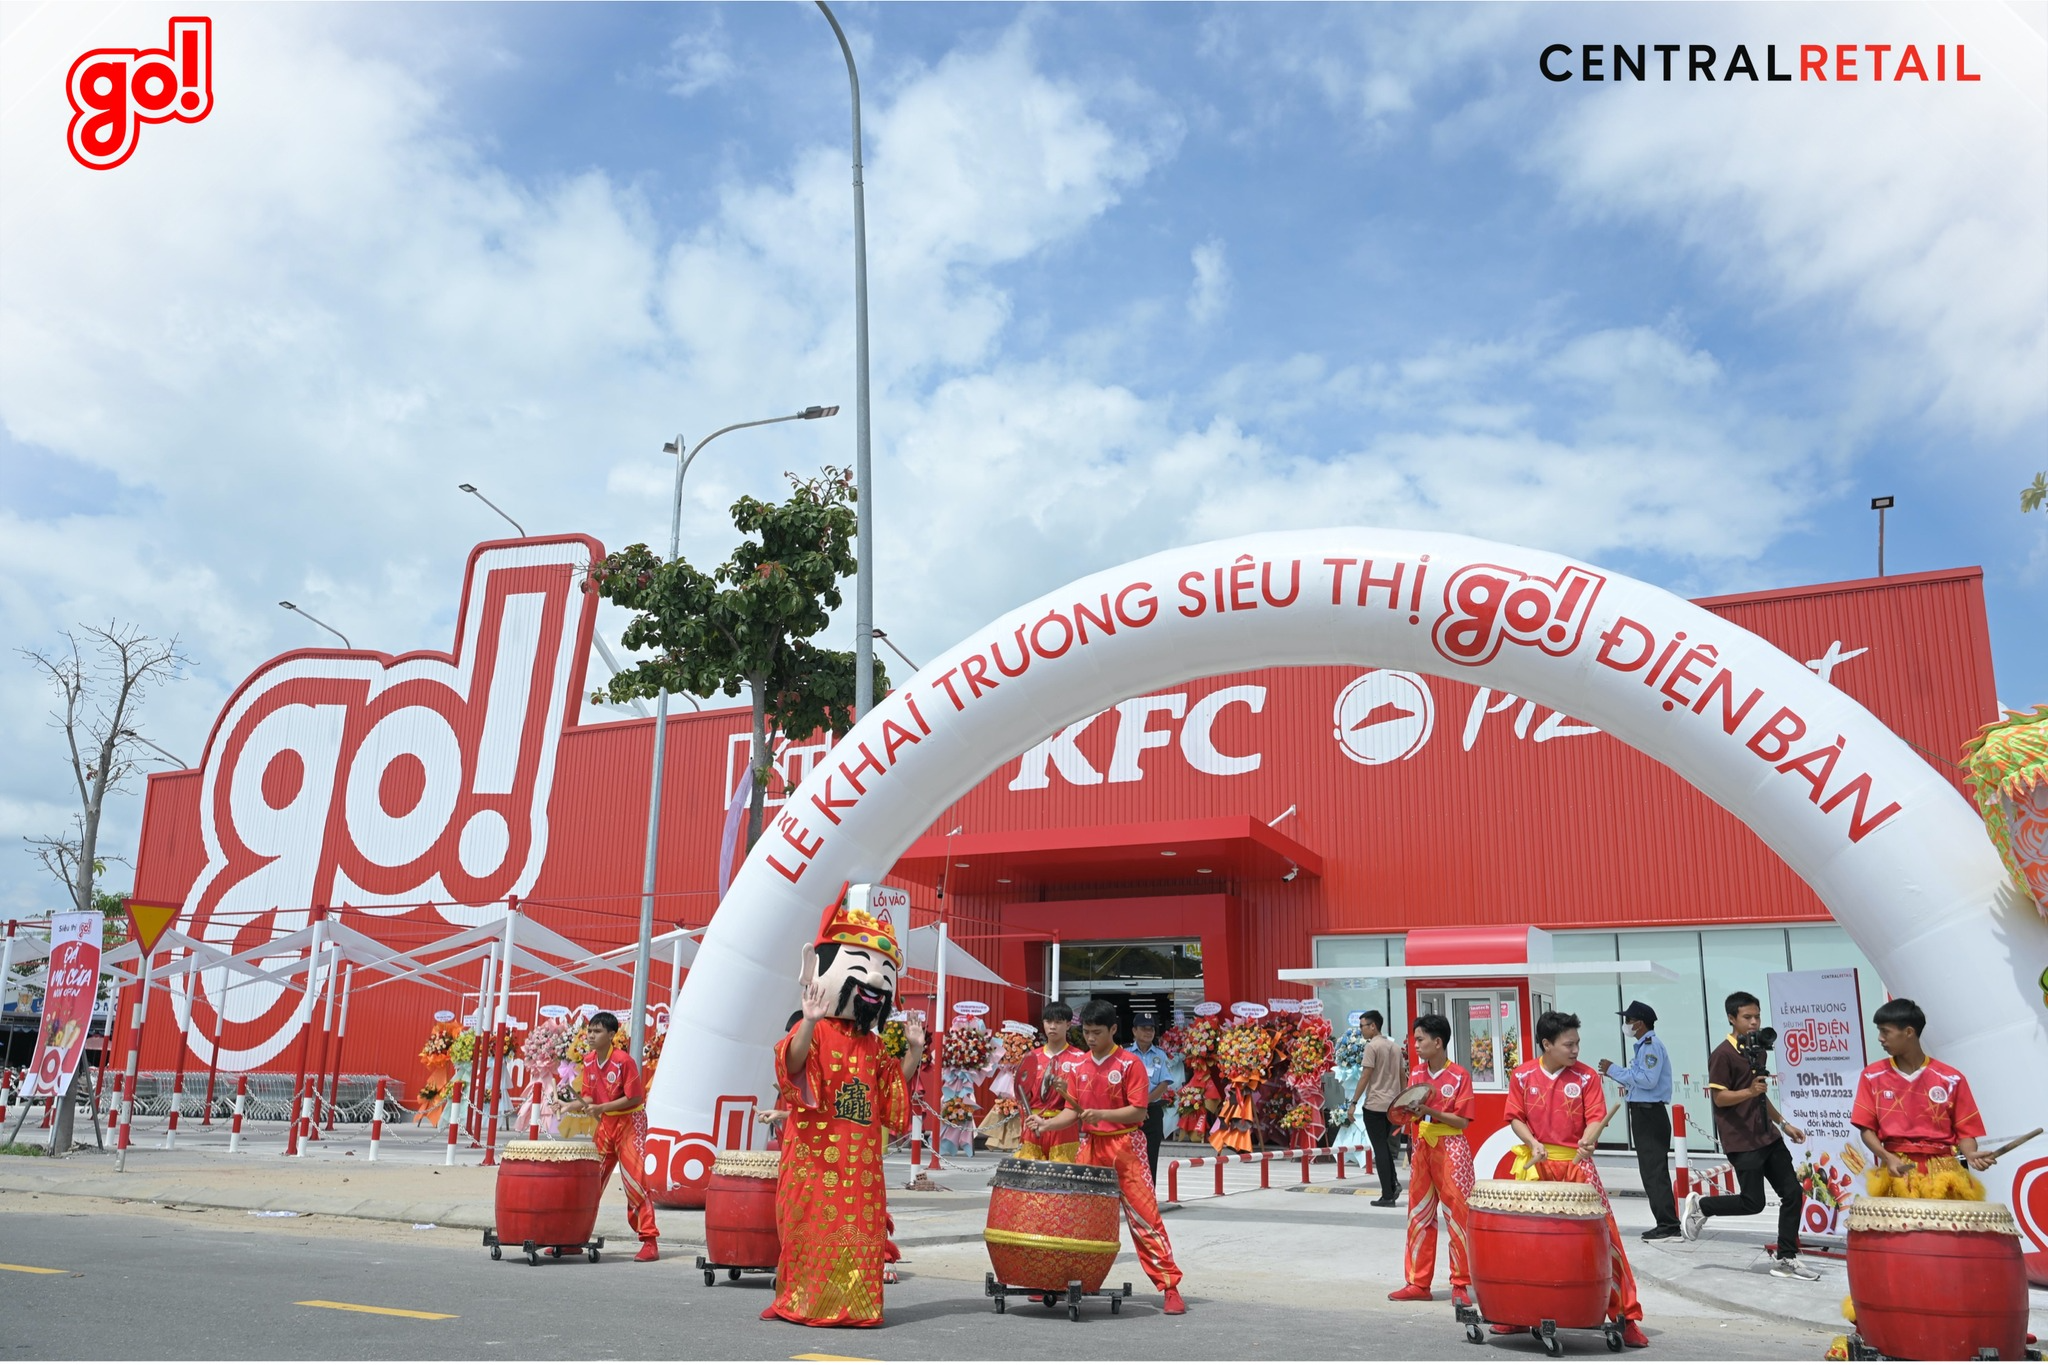 Central Retail in Vietnam holds an official opening ceremony for mini go! Dien Ban in Quang Nam Province